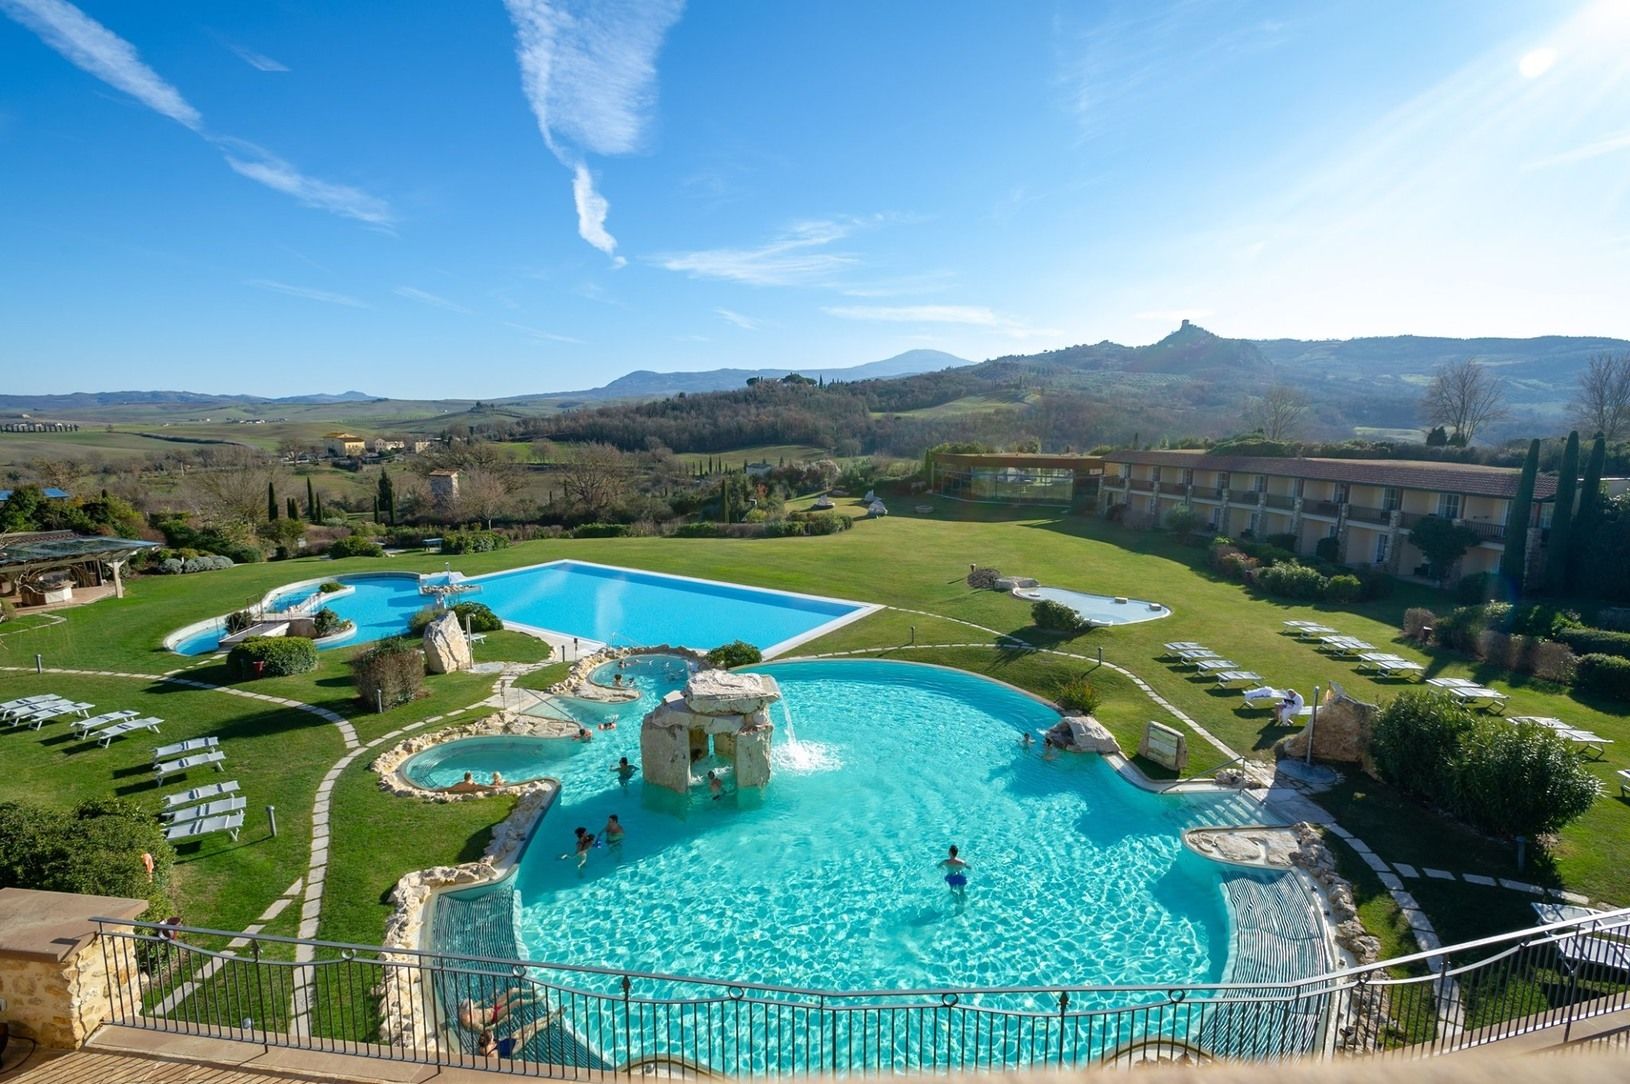 © Adler Thermae Hotel and Spa